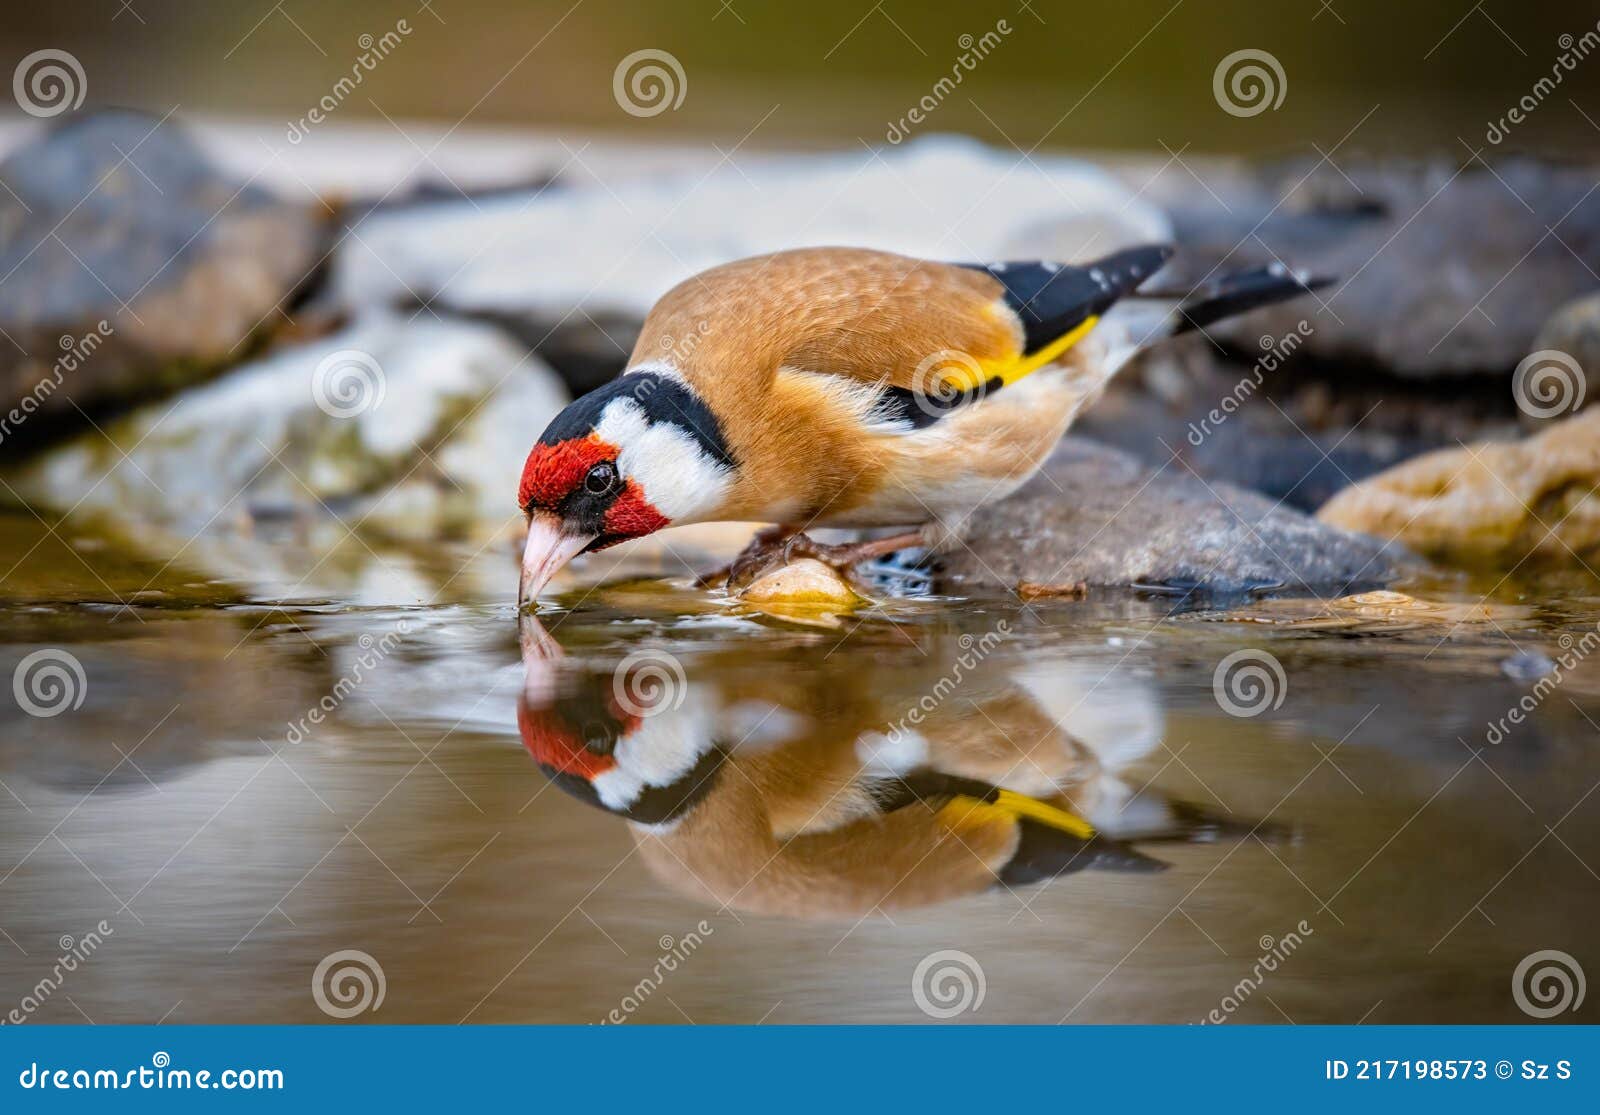 10,113 Bird Drinking Water Stock Photos - Free & Royalty-Free Stock Photos  from Dreamstime